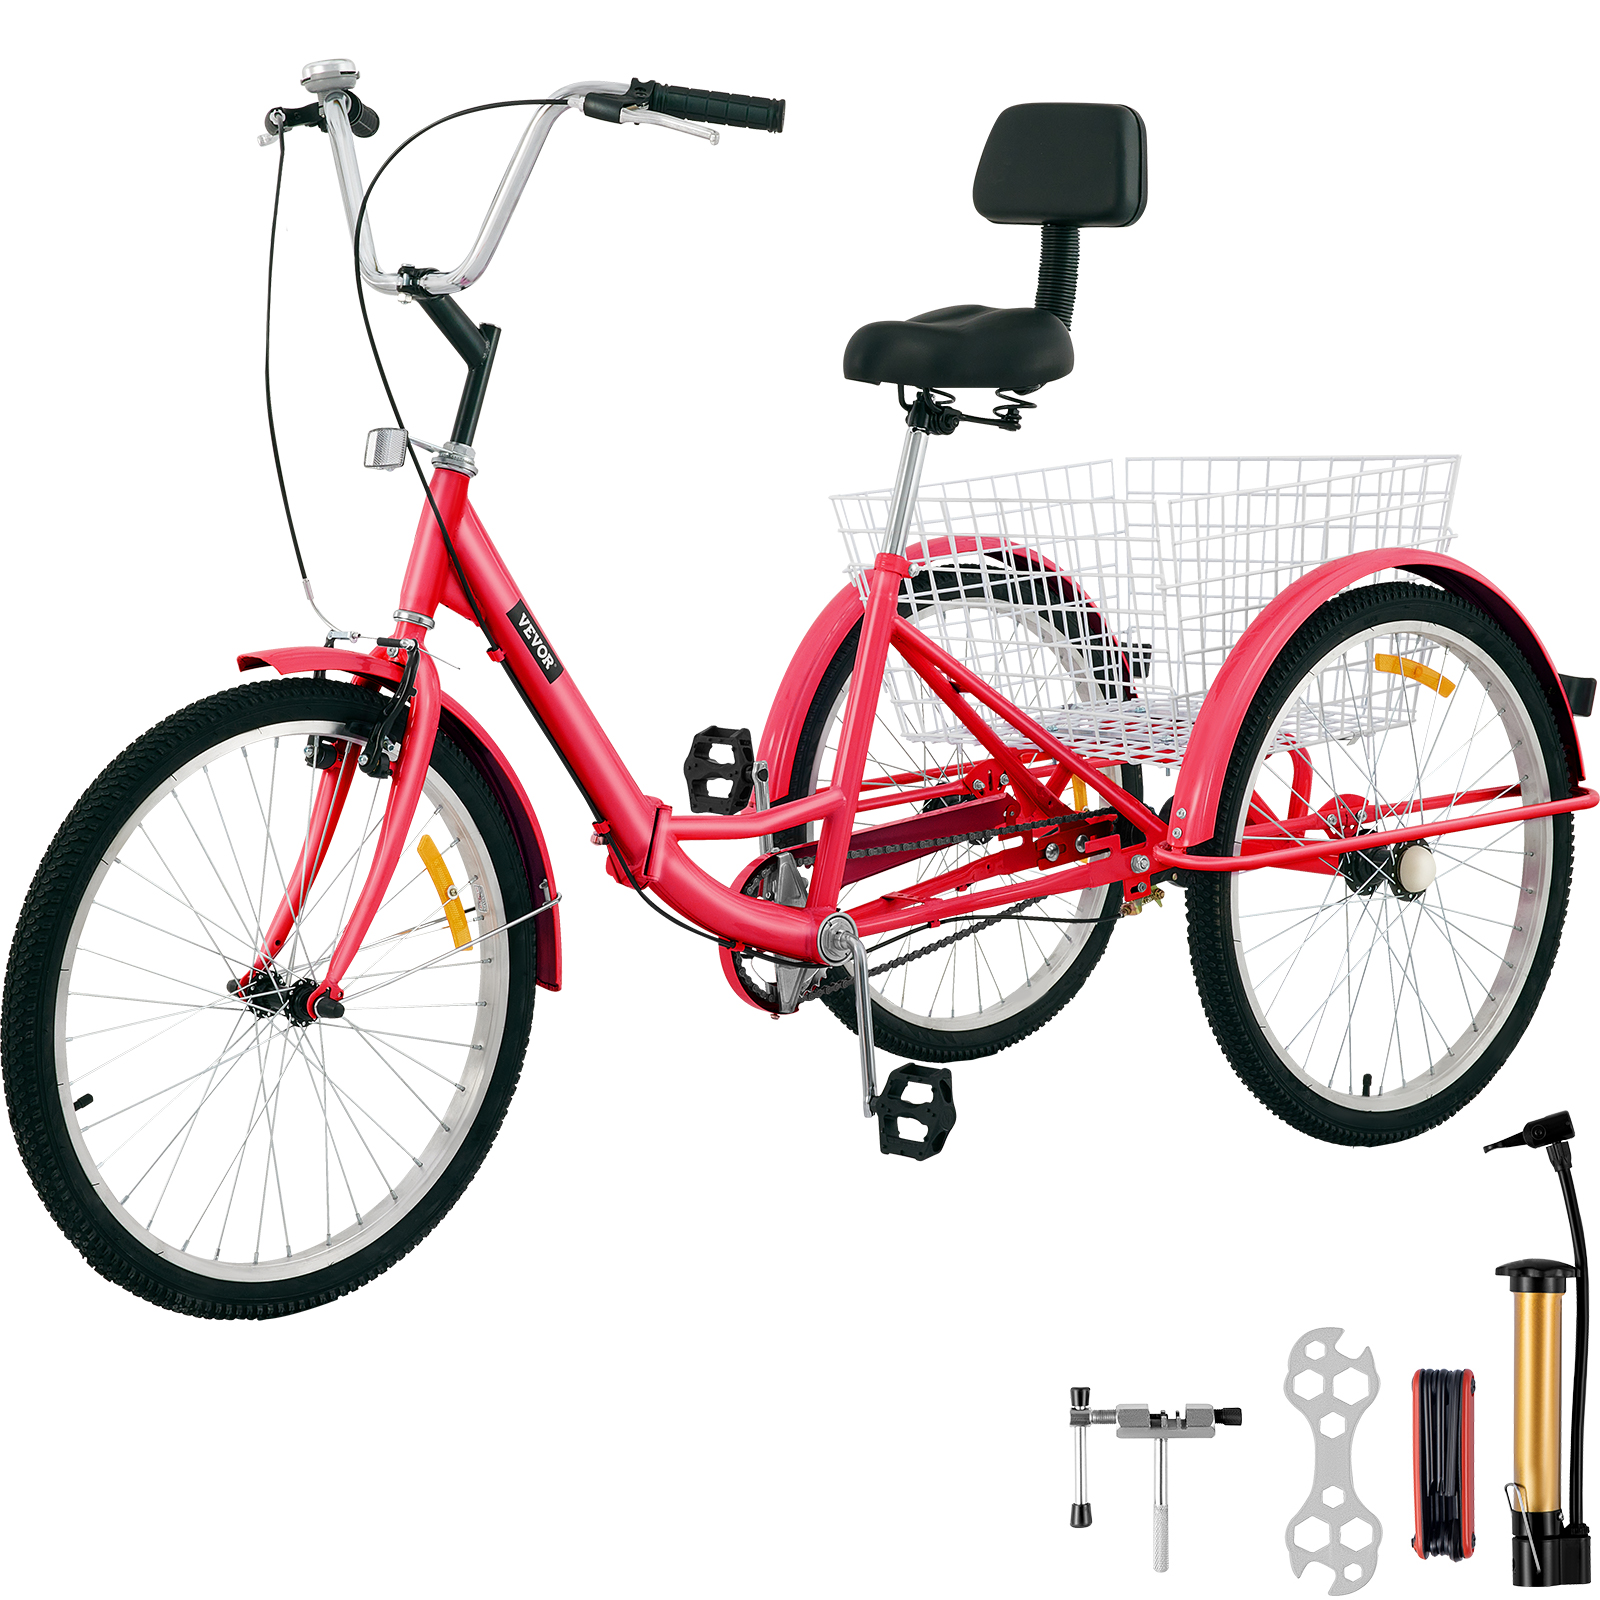 VEVOR Foldable Adult Tricycle 24'' Wheels Tricycle, 1-Speed Red Trike,  Wheels Colorful Bike with Basket, Portable and Foldable Bicycle for Adults  Exercise Shopping Picnic Outdoor Activities